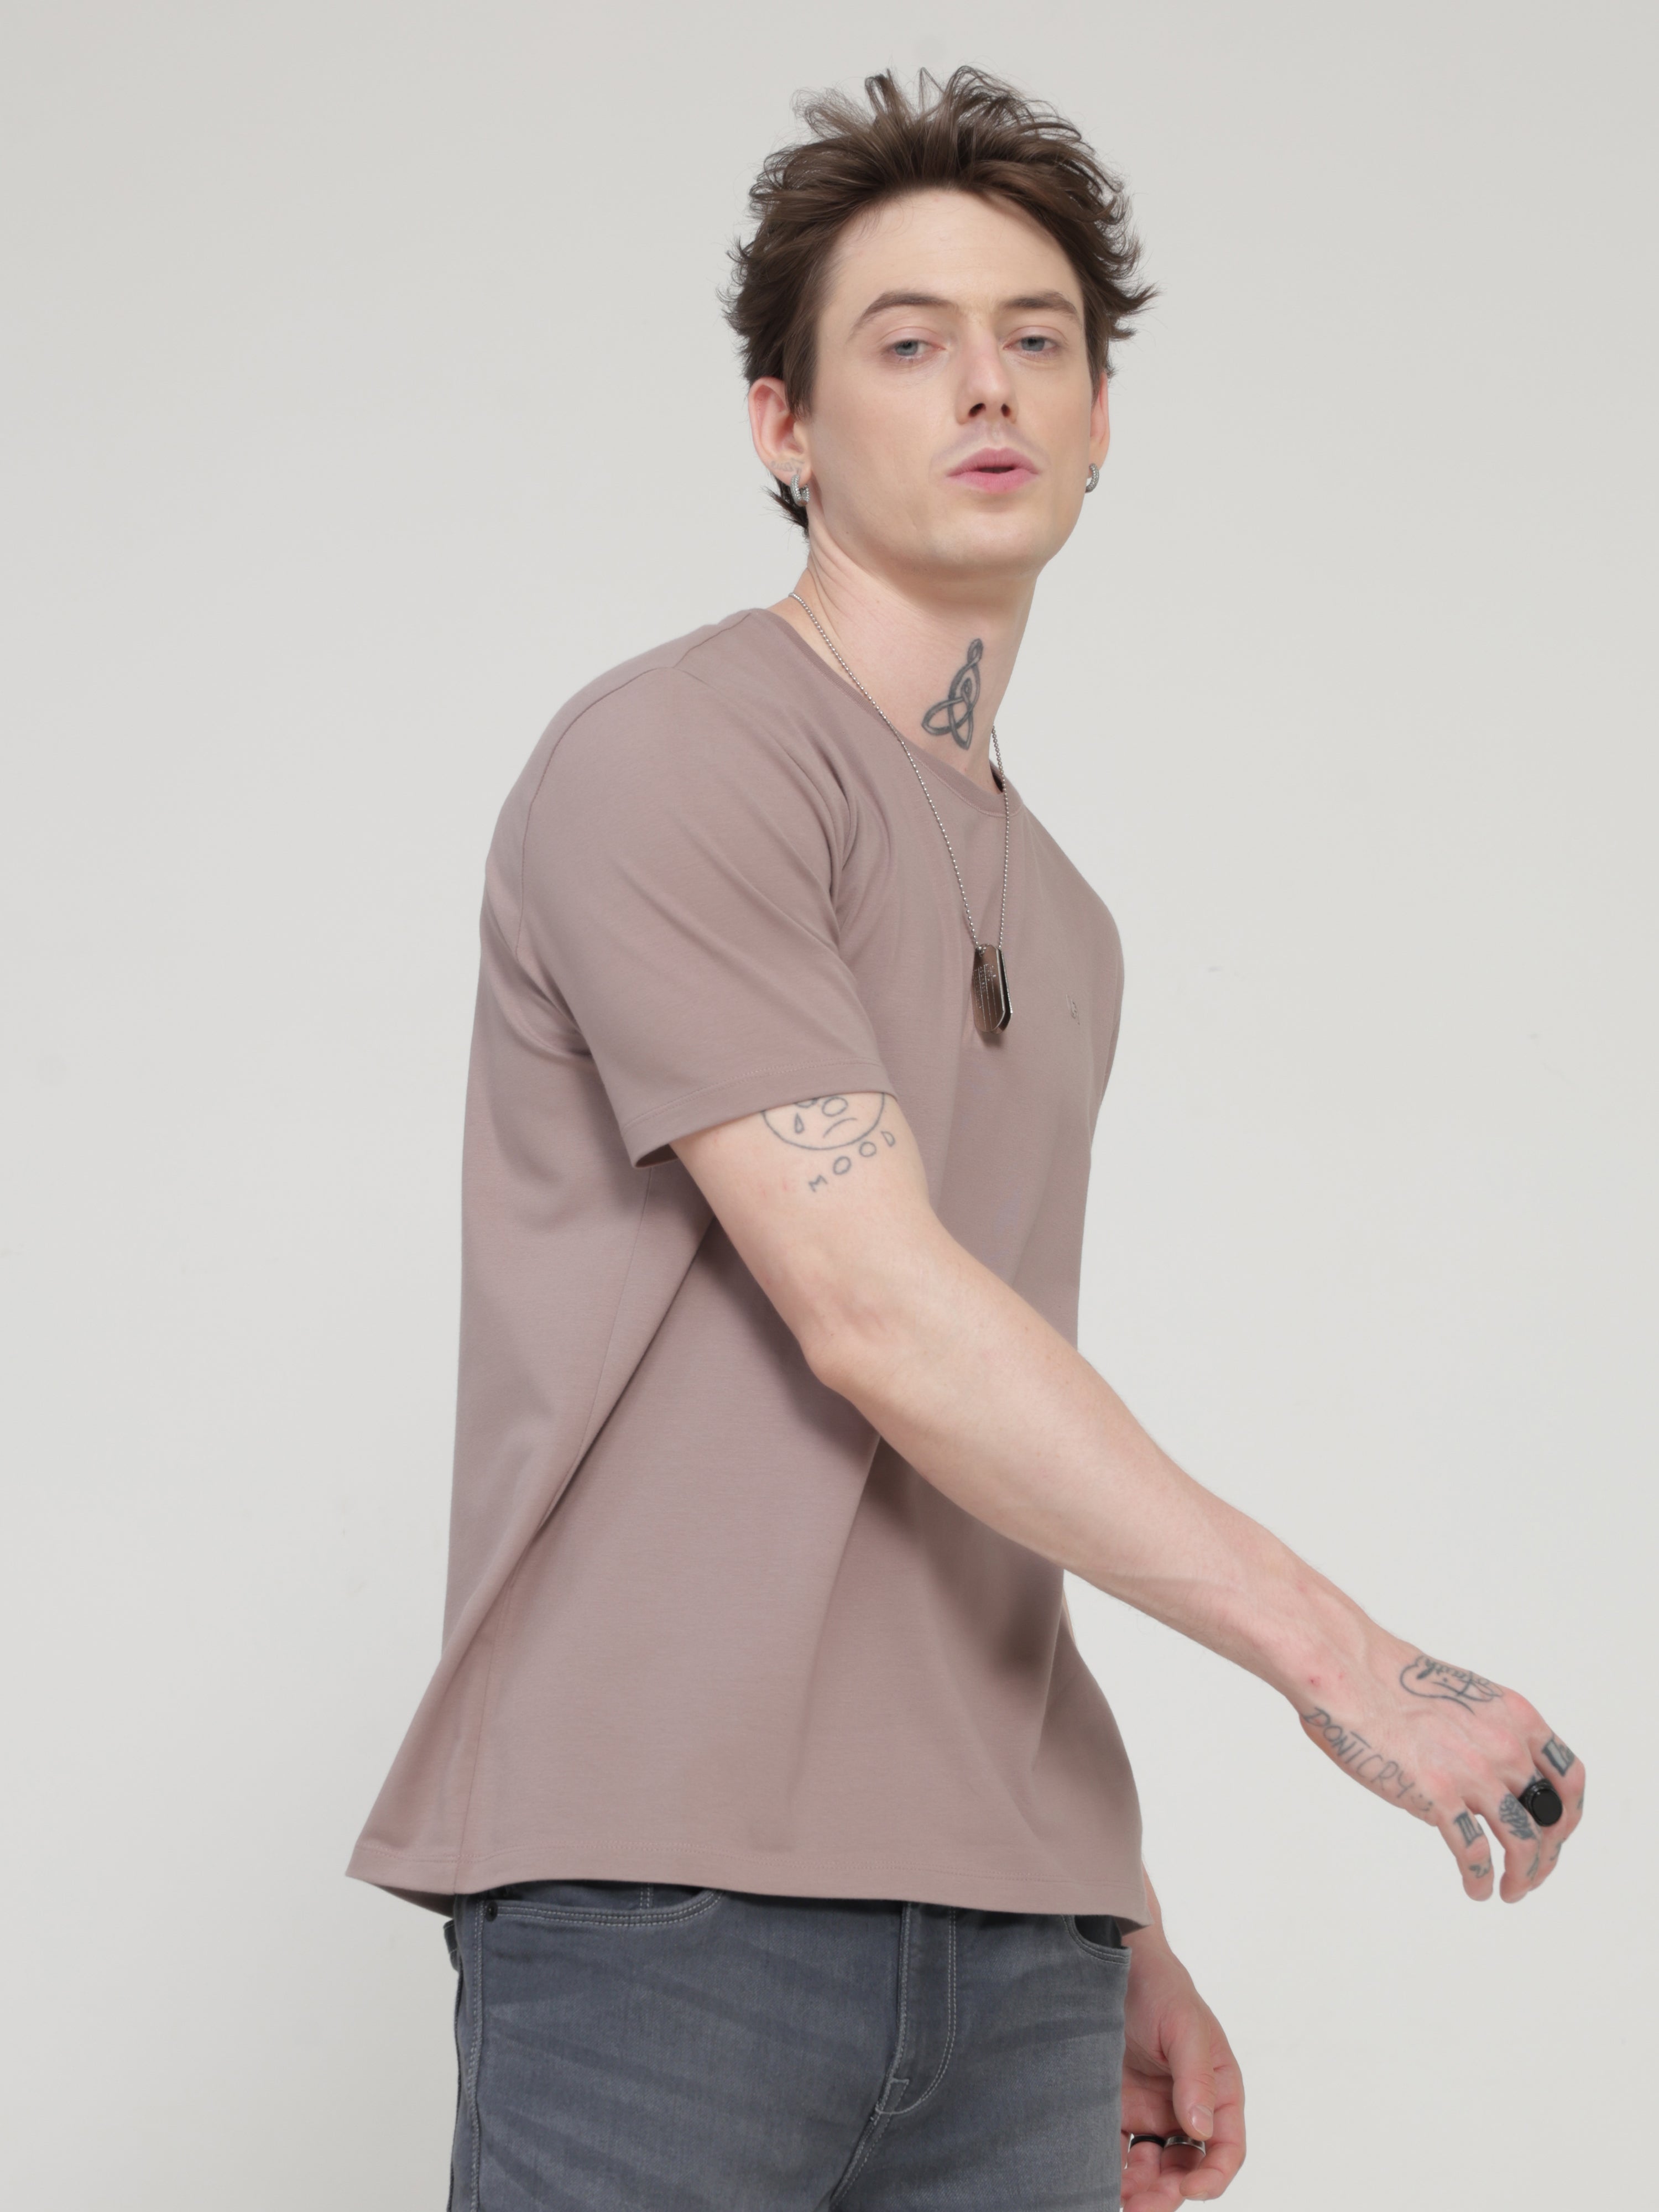 Model wearing dusky maroon round neck Turms T-shirt, tailored fit and stain-repellent, ideal stylish branded tshirt for men